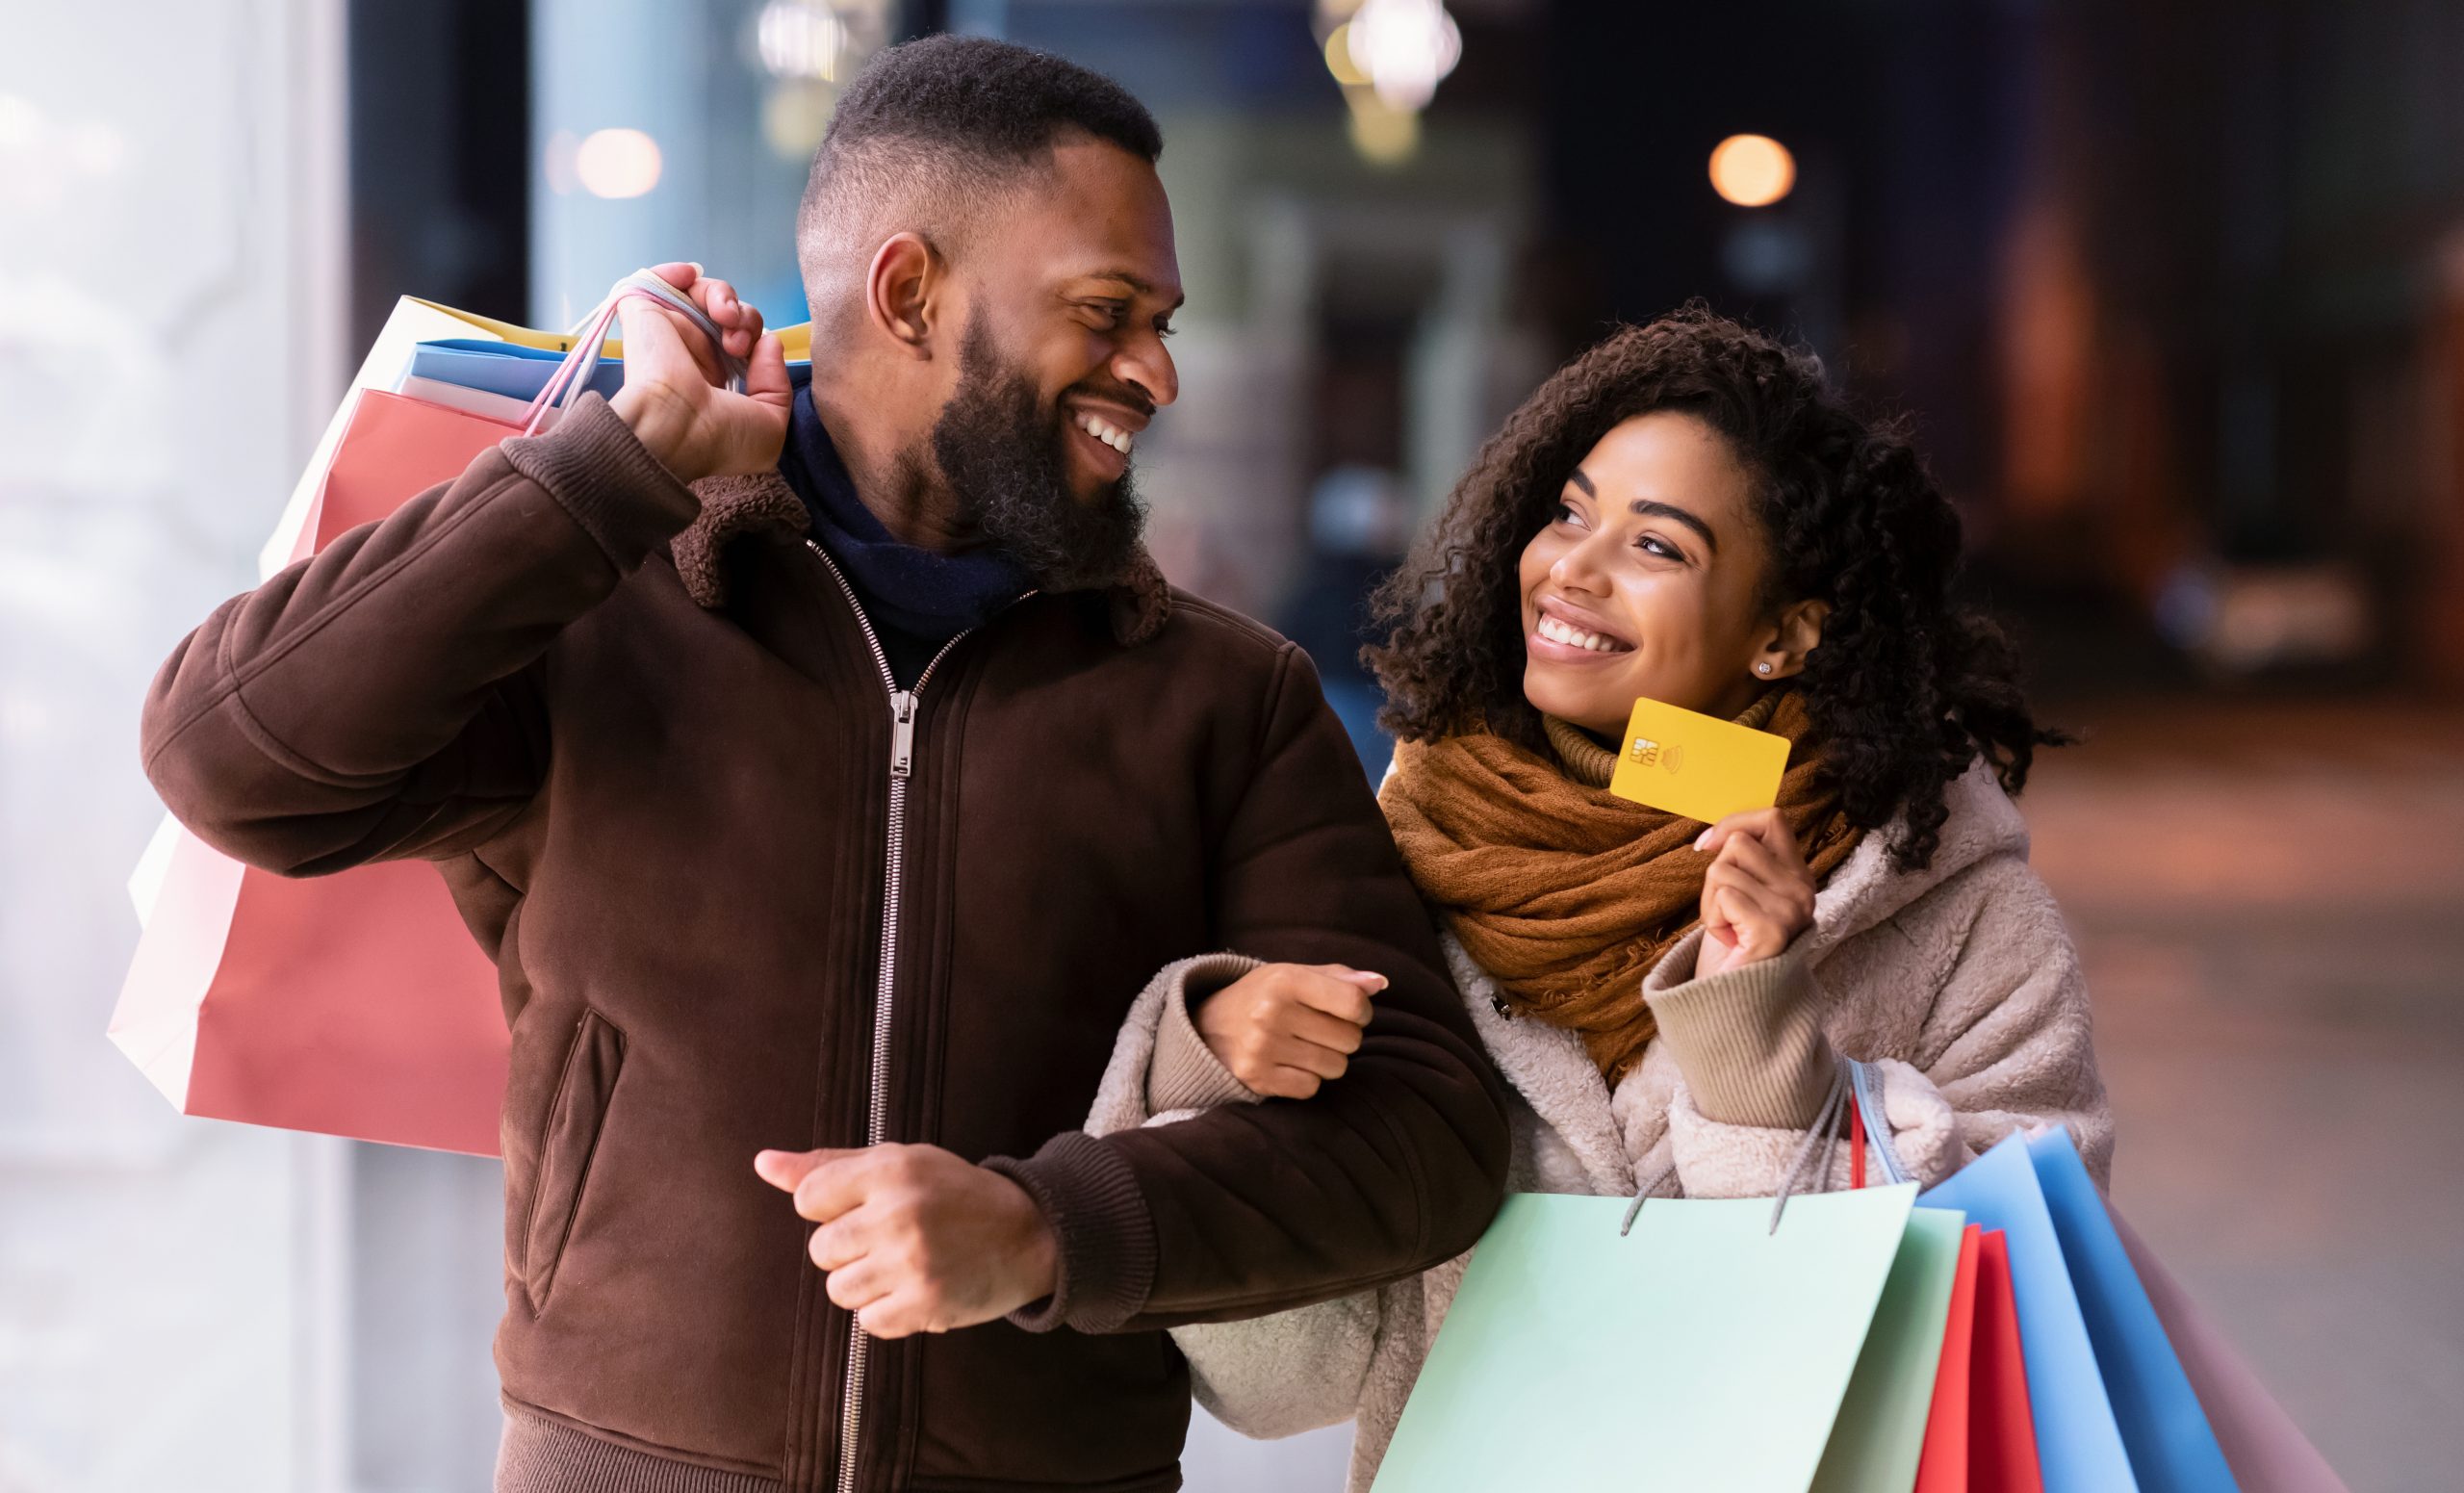 Let's Buy Something. Portrait of smiling black woman showing debit credit card to man, holding shopping bags, walking outside in the city near mall in the evening, blurred background